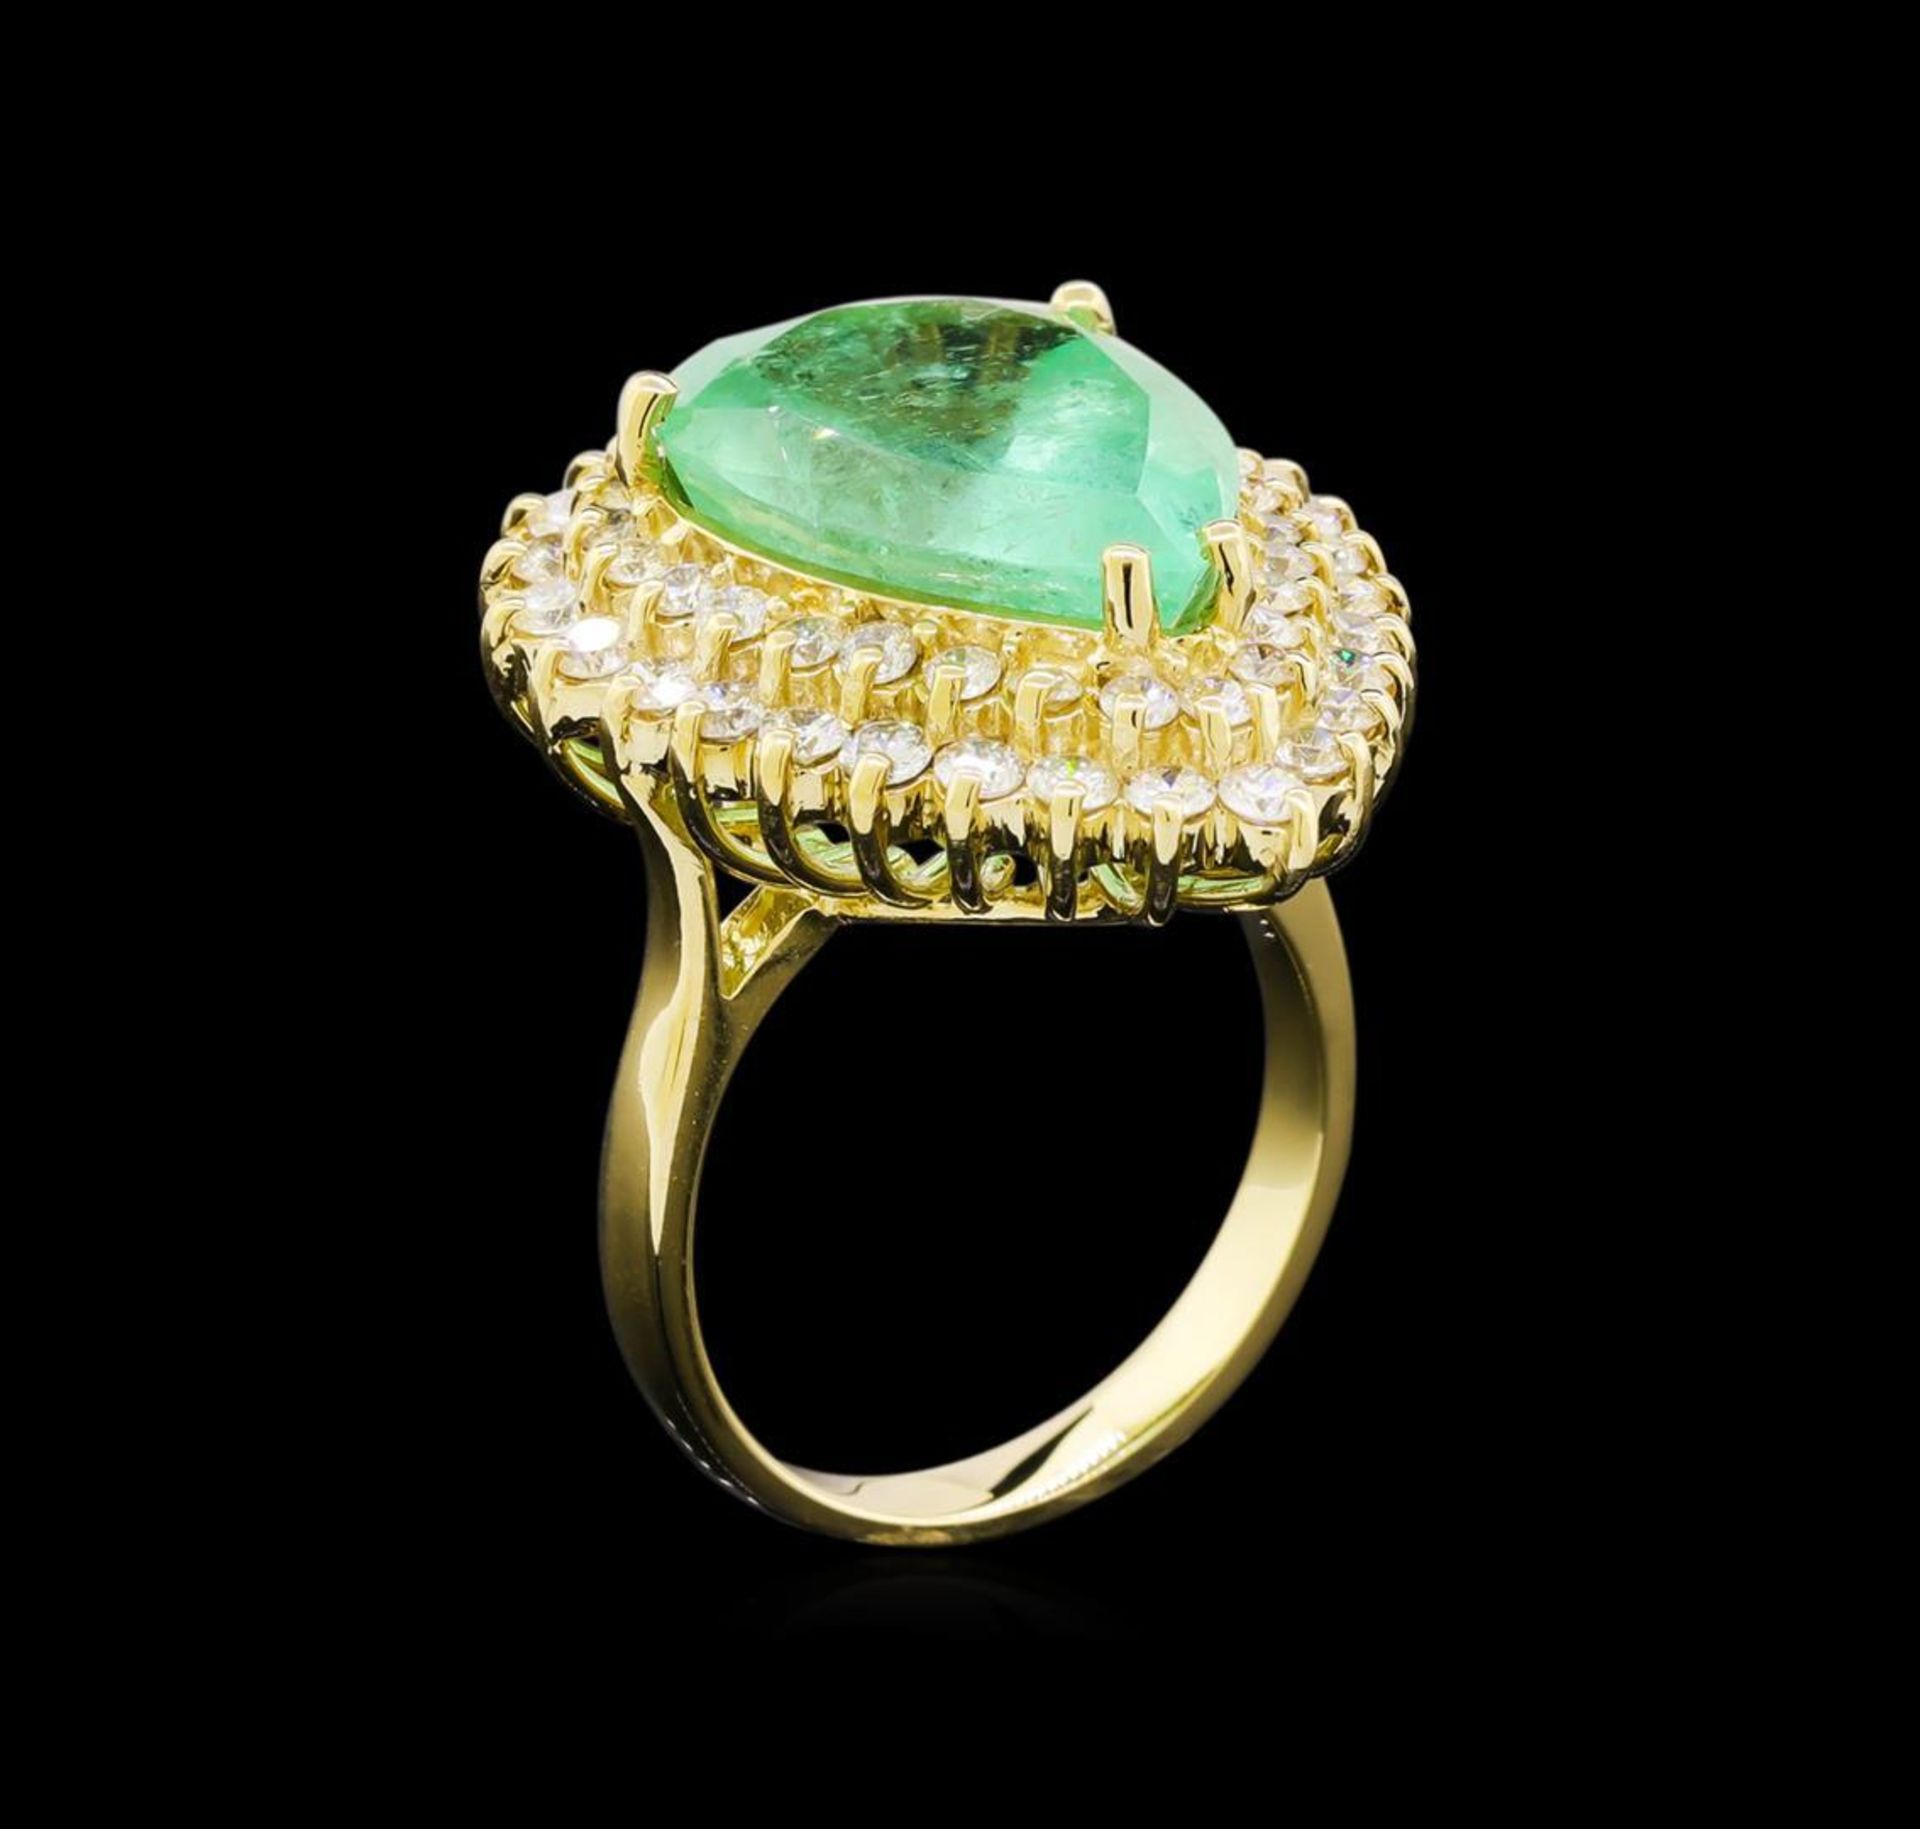 GIA Cert 9.78 ctw Emerald and Diamond Ring - 14KT Yellow Gold - Image 4 of 6